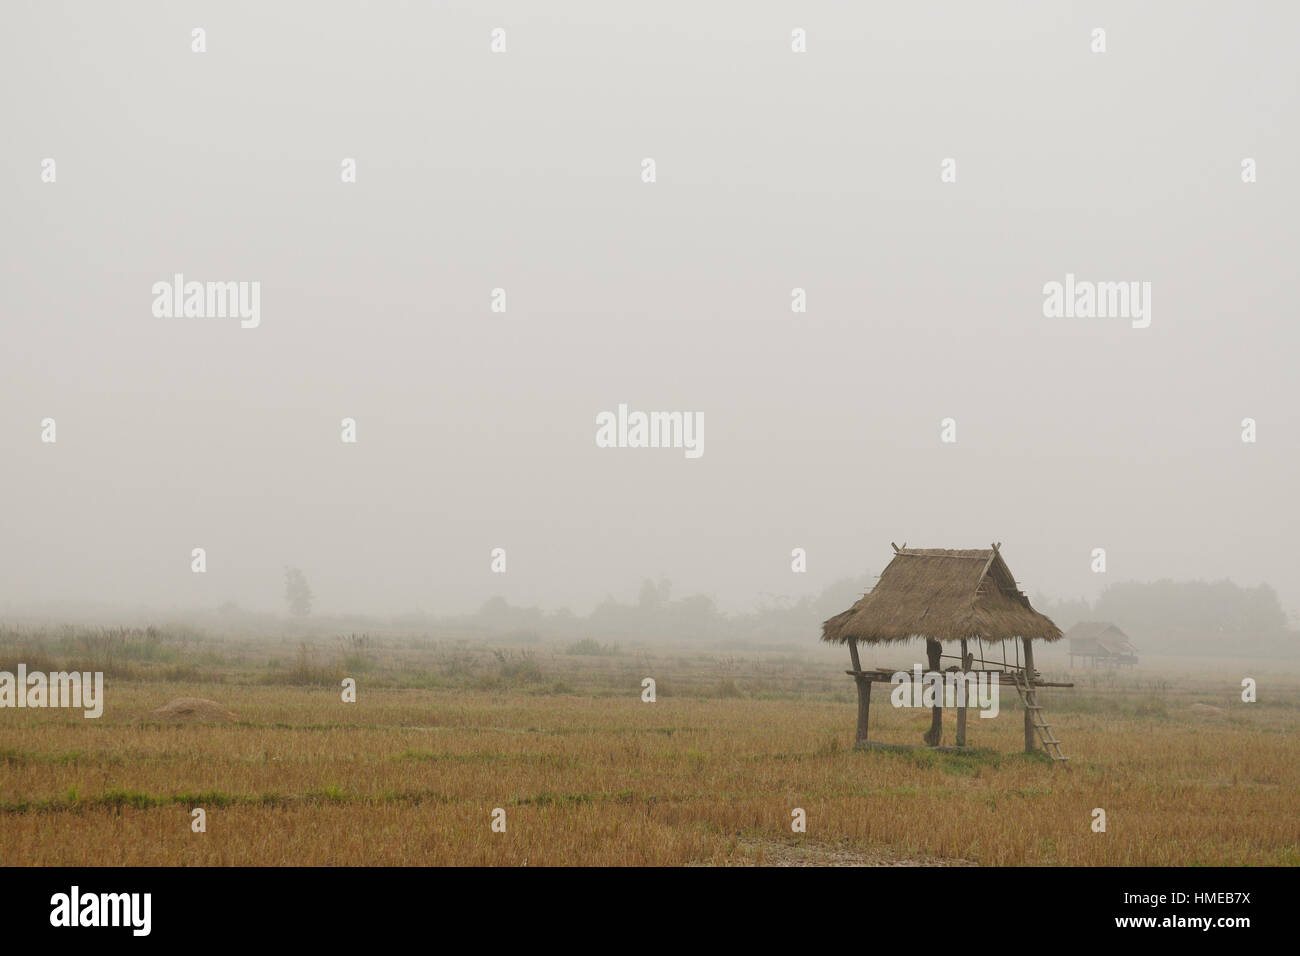 Lao - rural scene on the village near Muang Sing Stock Photo